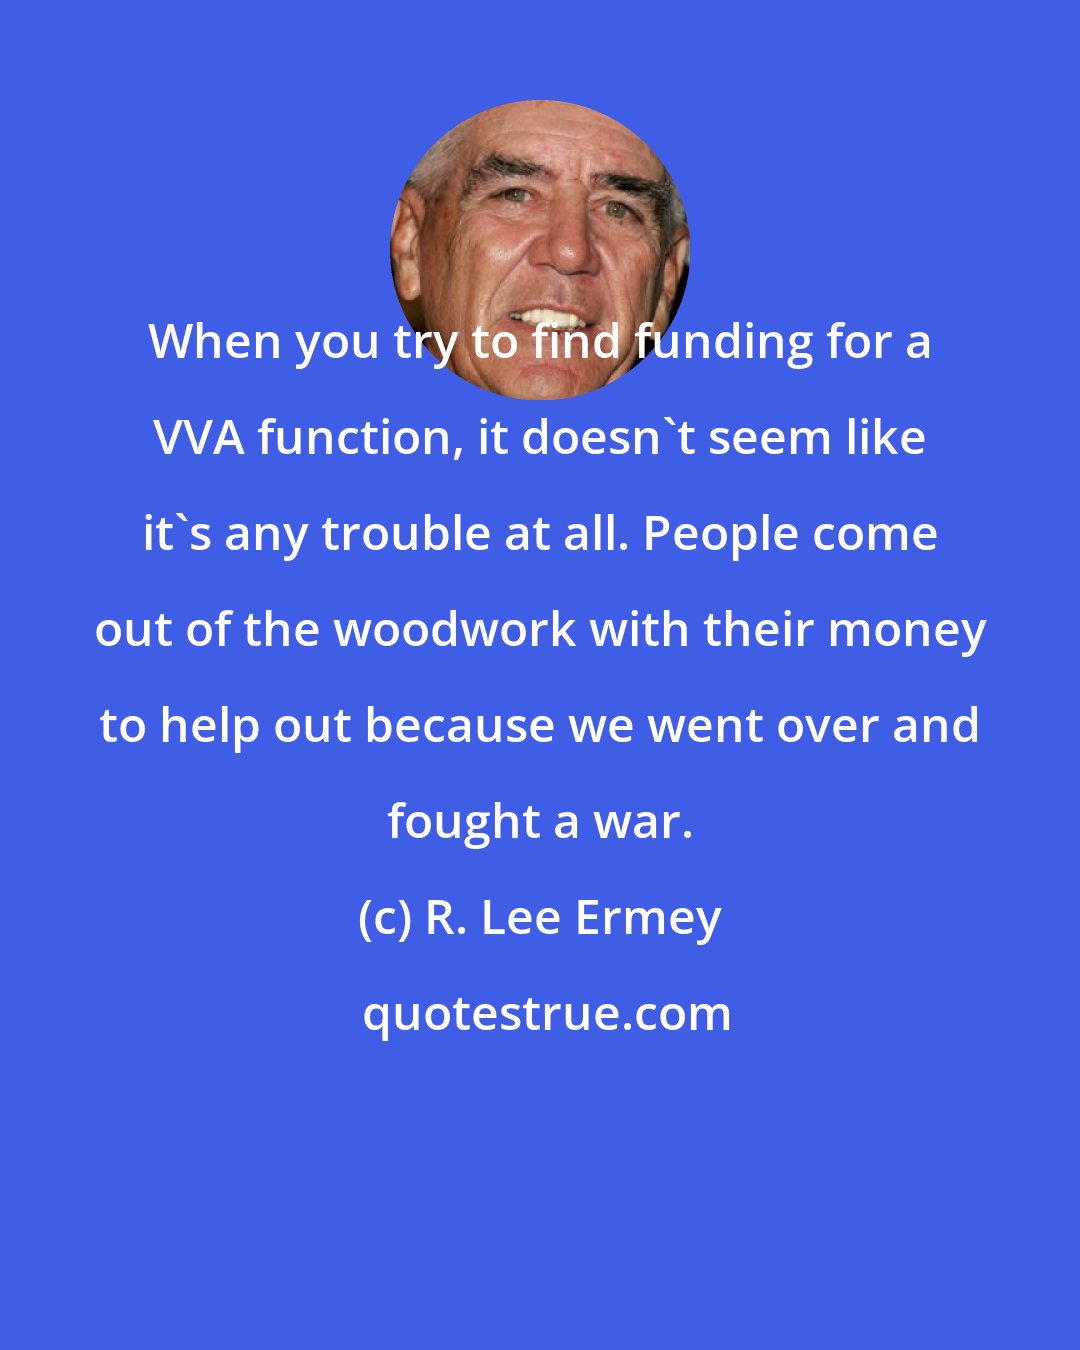 R. Lee Ermey: When you try to find funding for a VVA function, it doesn't seem like it's any trouble at all. People come out of the woodwork with their money to help out because we went over and fought a war.